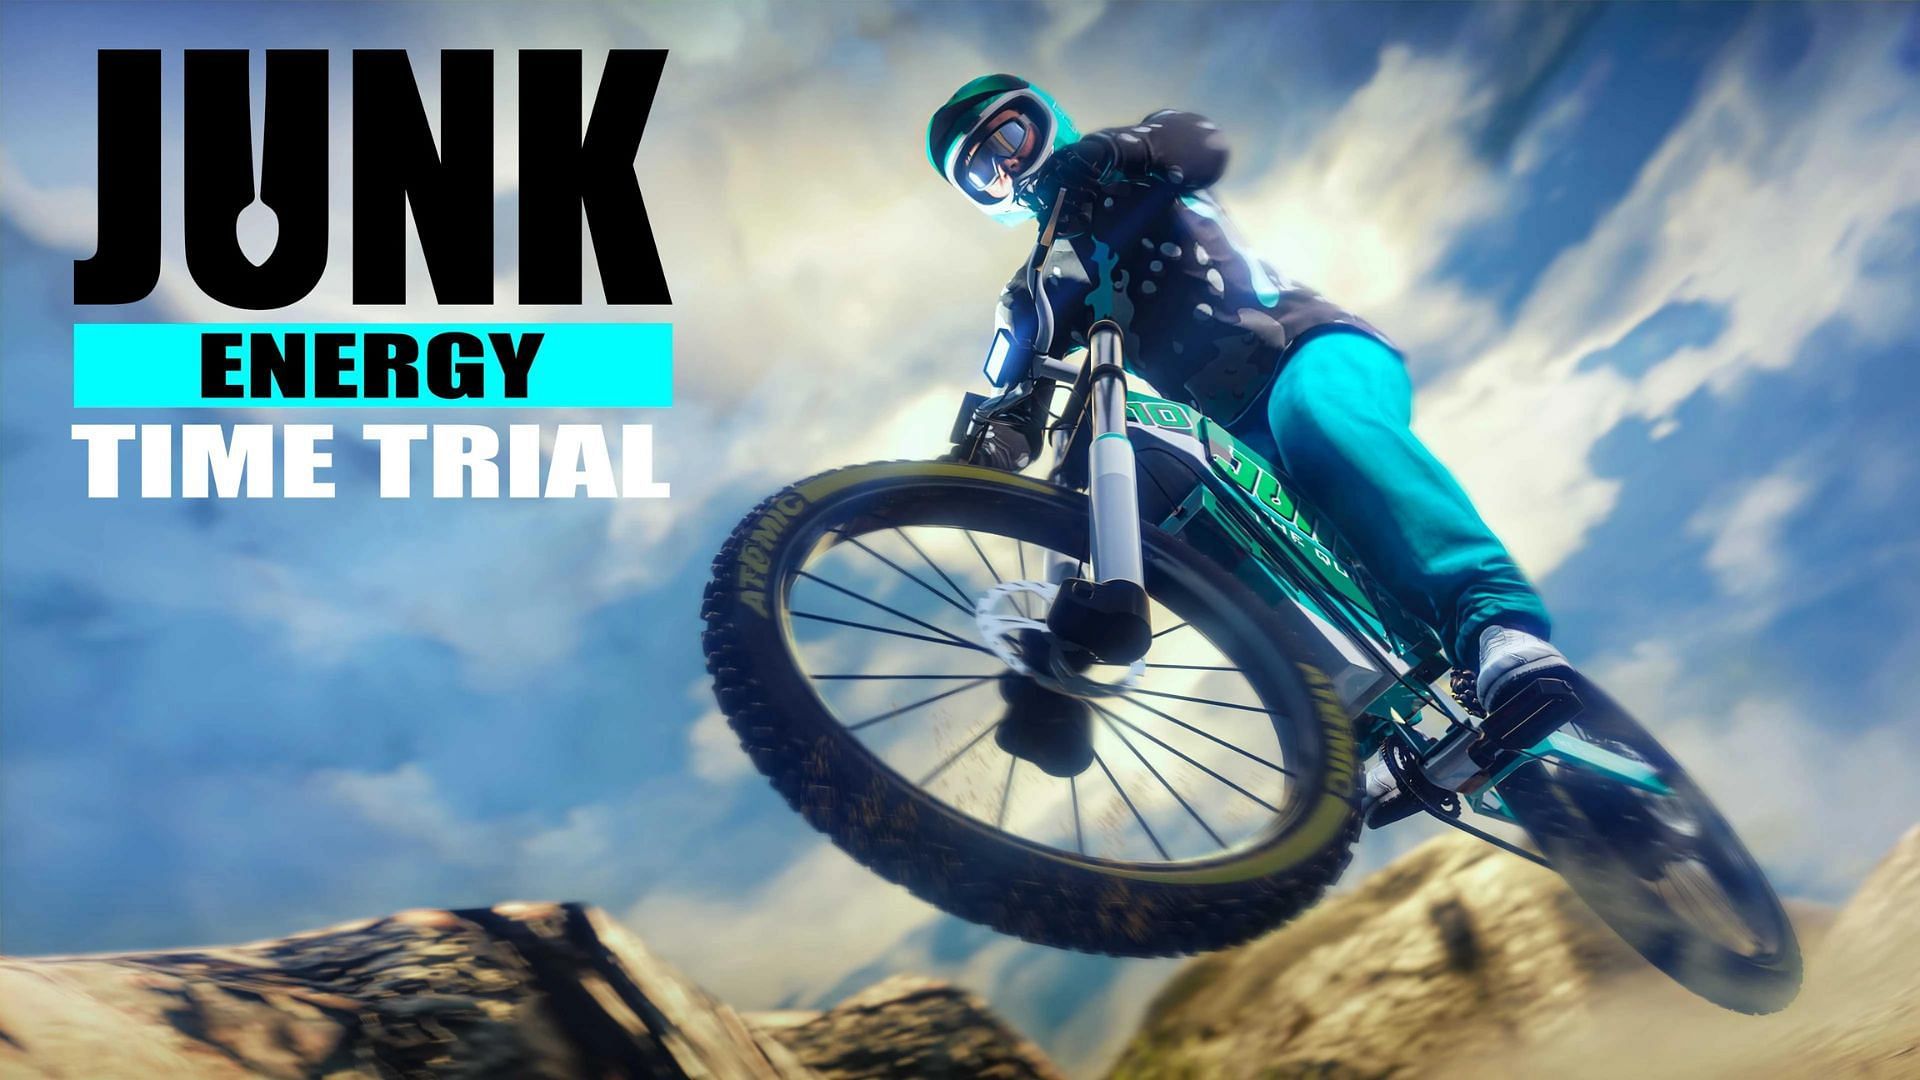 An official image of Junk Energy Time Trials (Image via Rockstar Games)